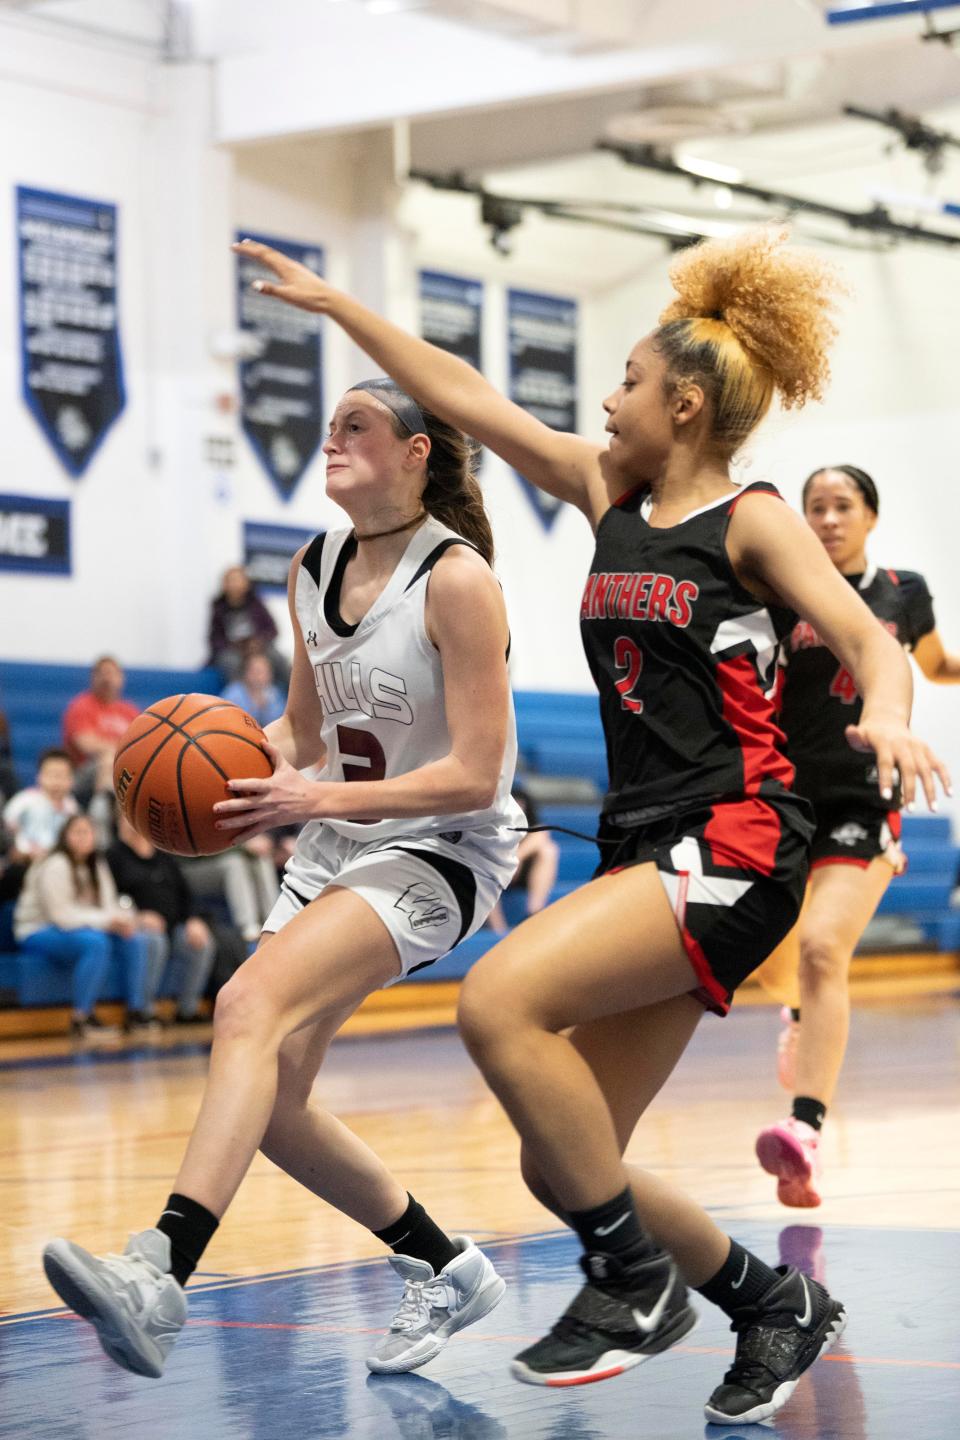 Passaic Charter vs. Wayne Hills in the Passaic County Girls Basketball semifinals at Passaic County Technical Institute in Wayne on Thursday, February 16, 2023.  WH #3 Lilly Weltyman drives to the basket as PC #2 Asoni Henderson defends.